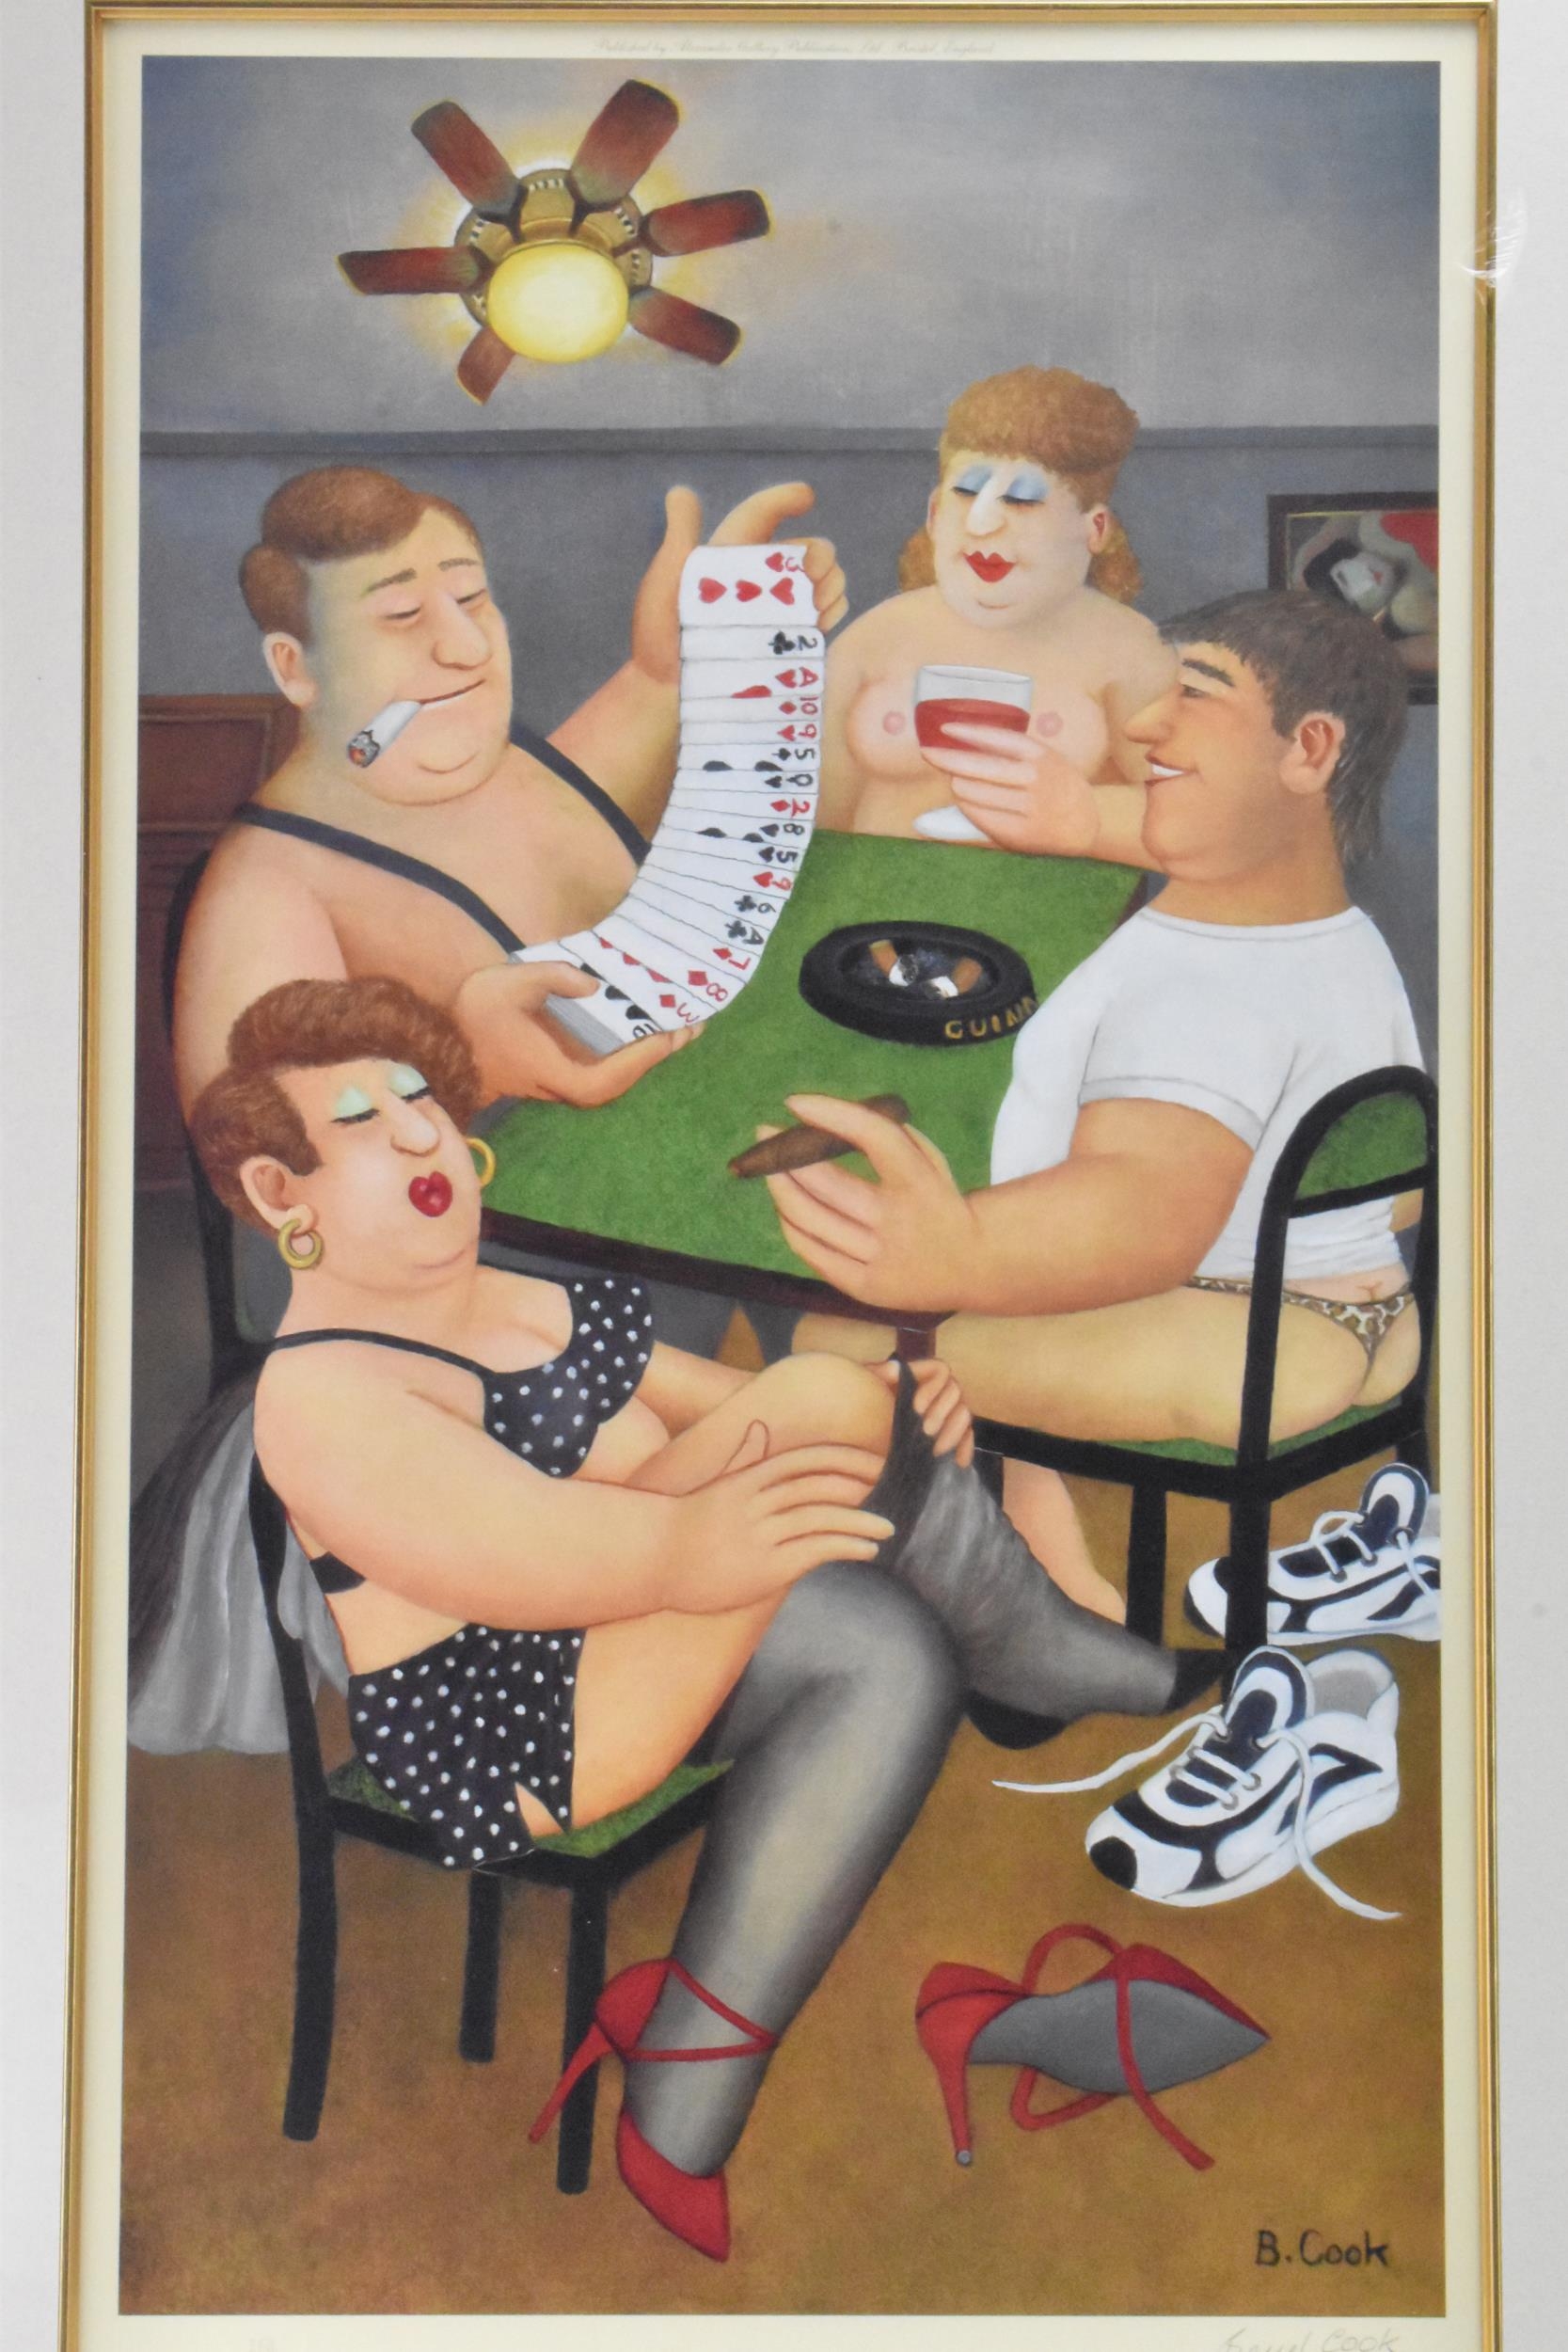 Beryl Cook (1926-2008) 'Strip Poker' signed limited edition print, published 2006, numbered 288/650, - Image 2 of 5